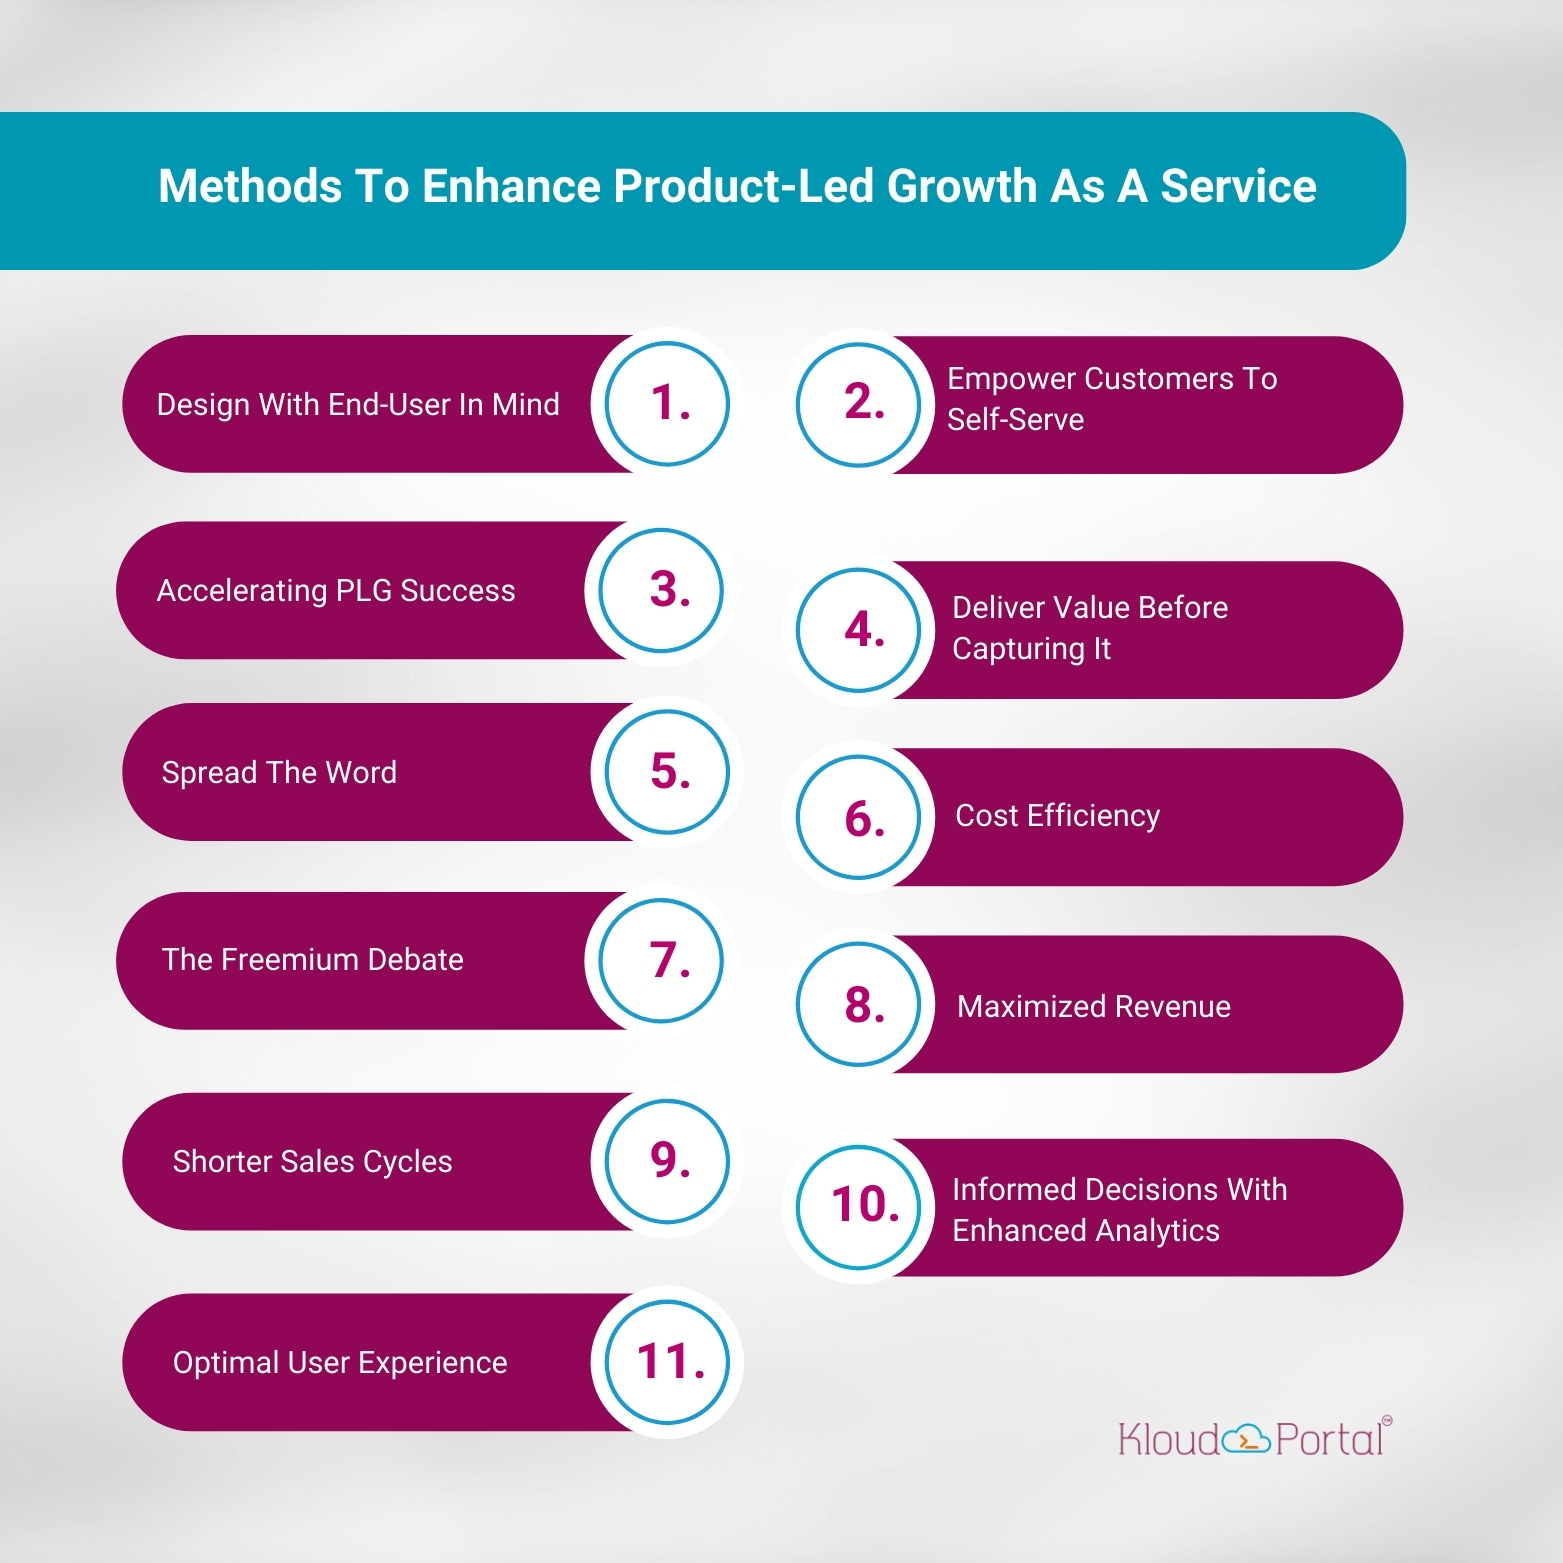 Benefits of Product-led growth strategies